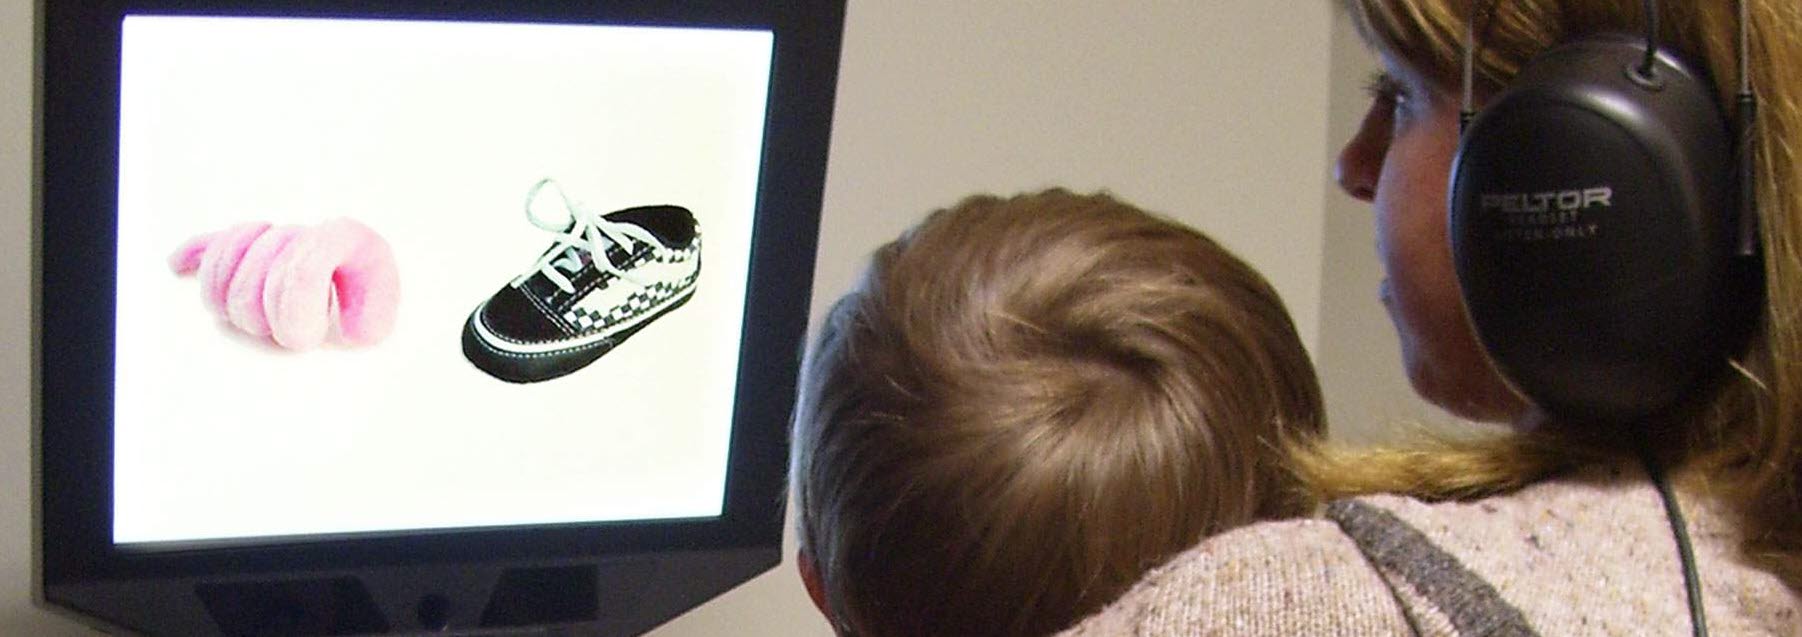  A toddler sitting on his mom’s lap watches the  disfluency study movie on the Tobii Pro screen based eye tracker.